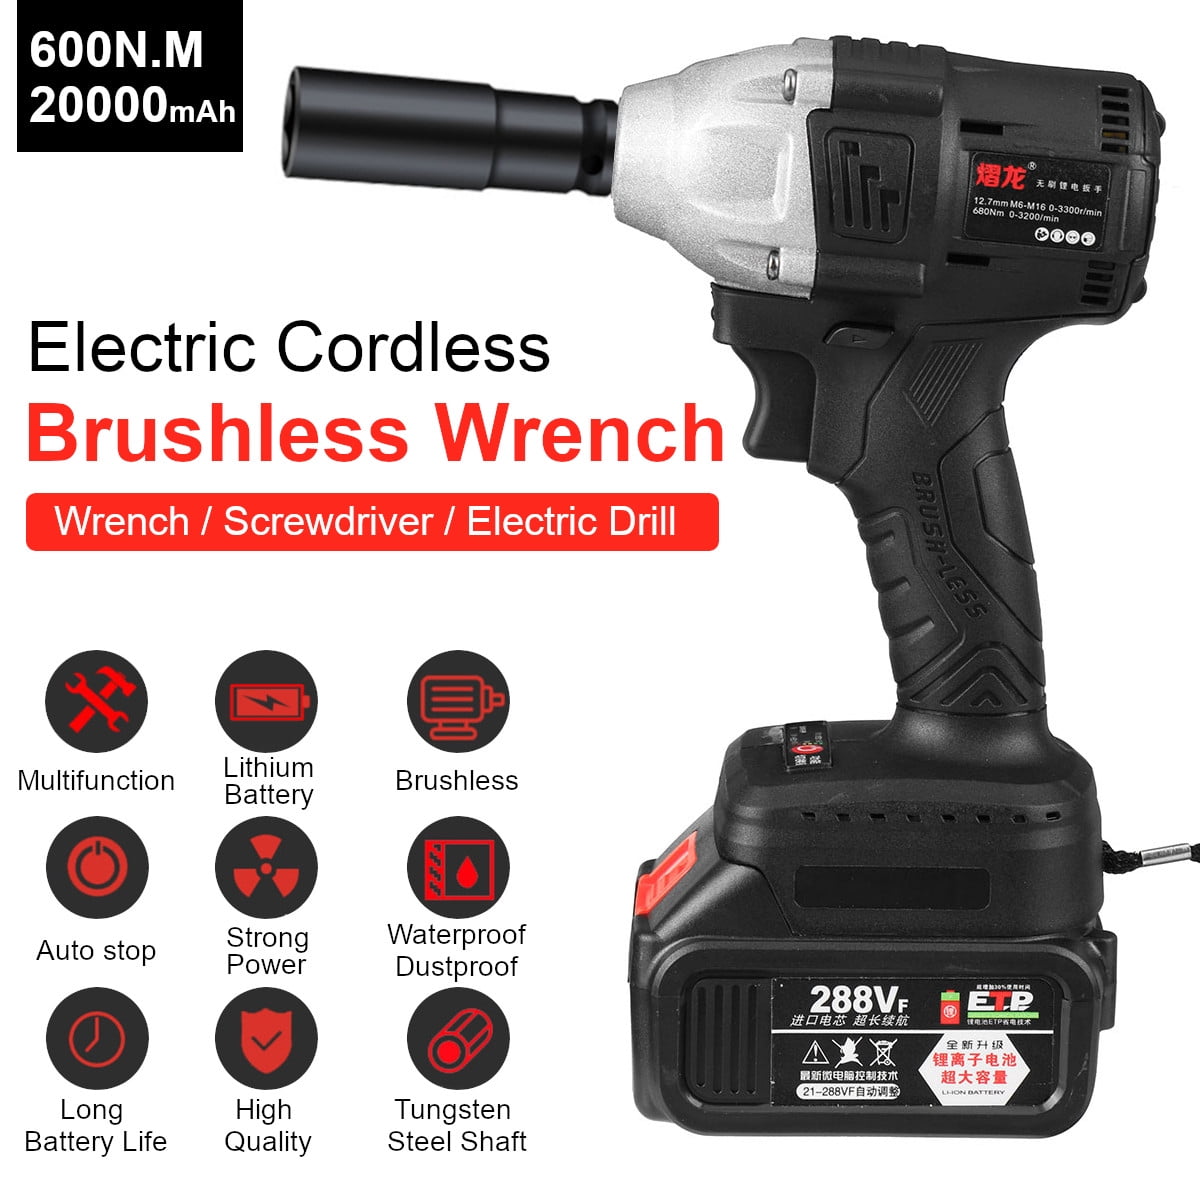 288VF 630N.m 1/2" Brushless Cordless Impact Wrench w/19800mAH Battery and 